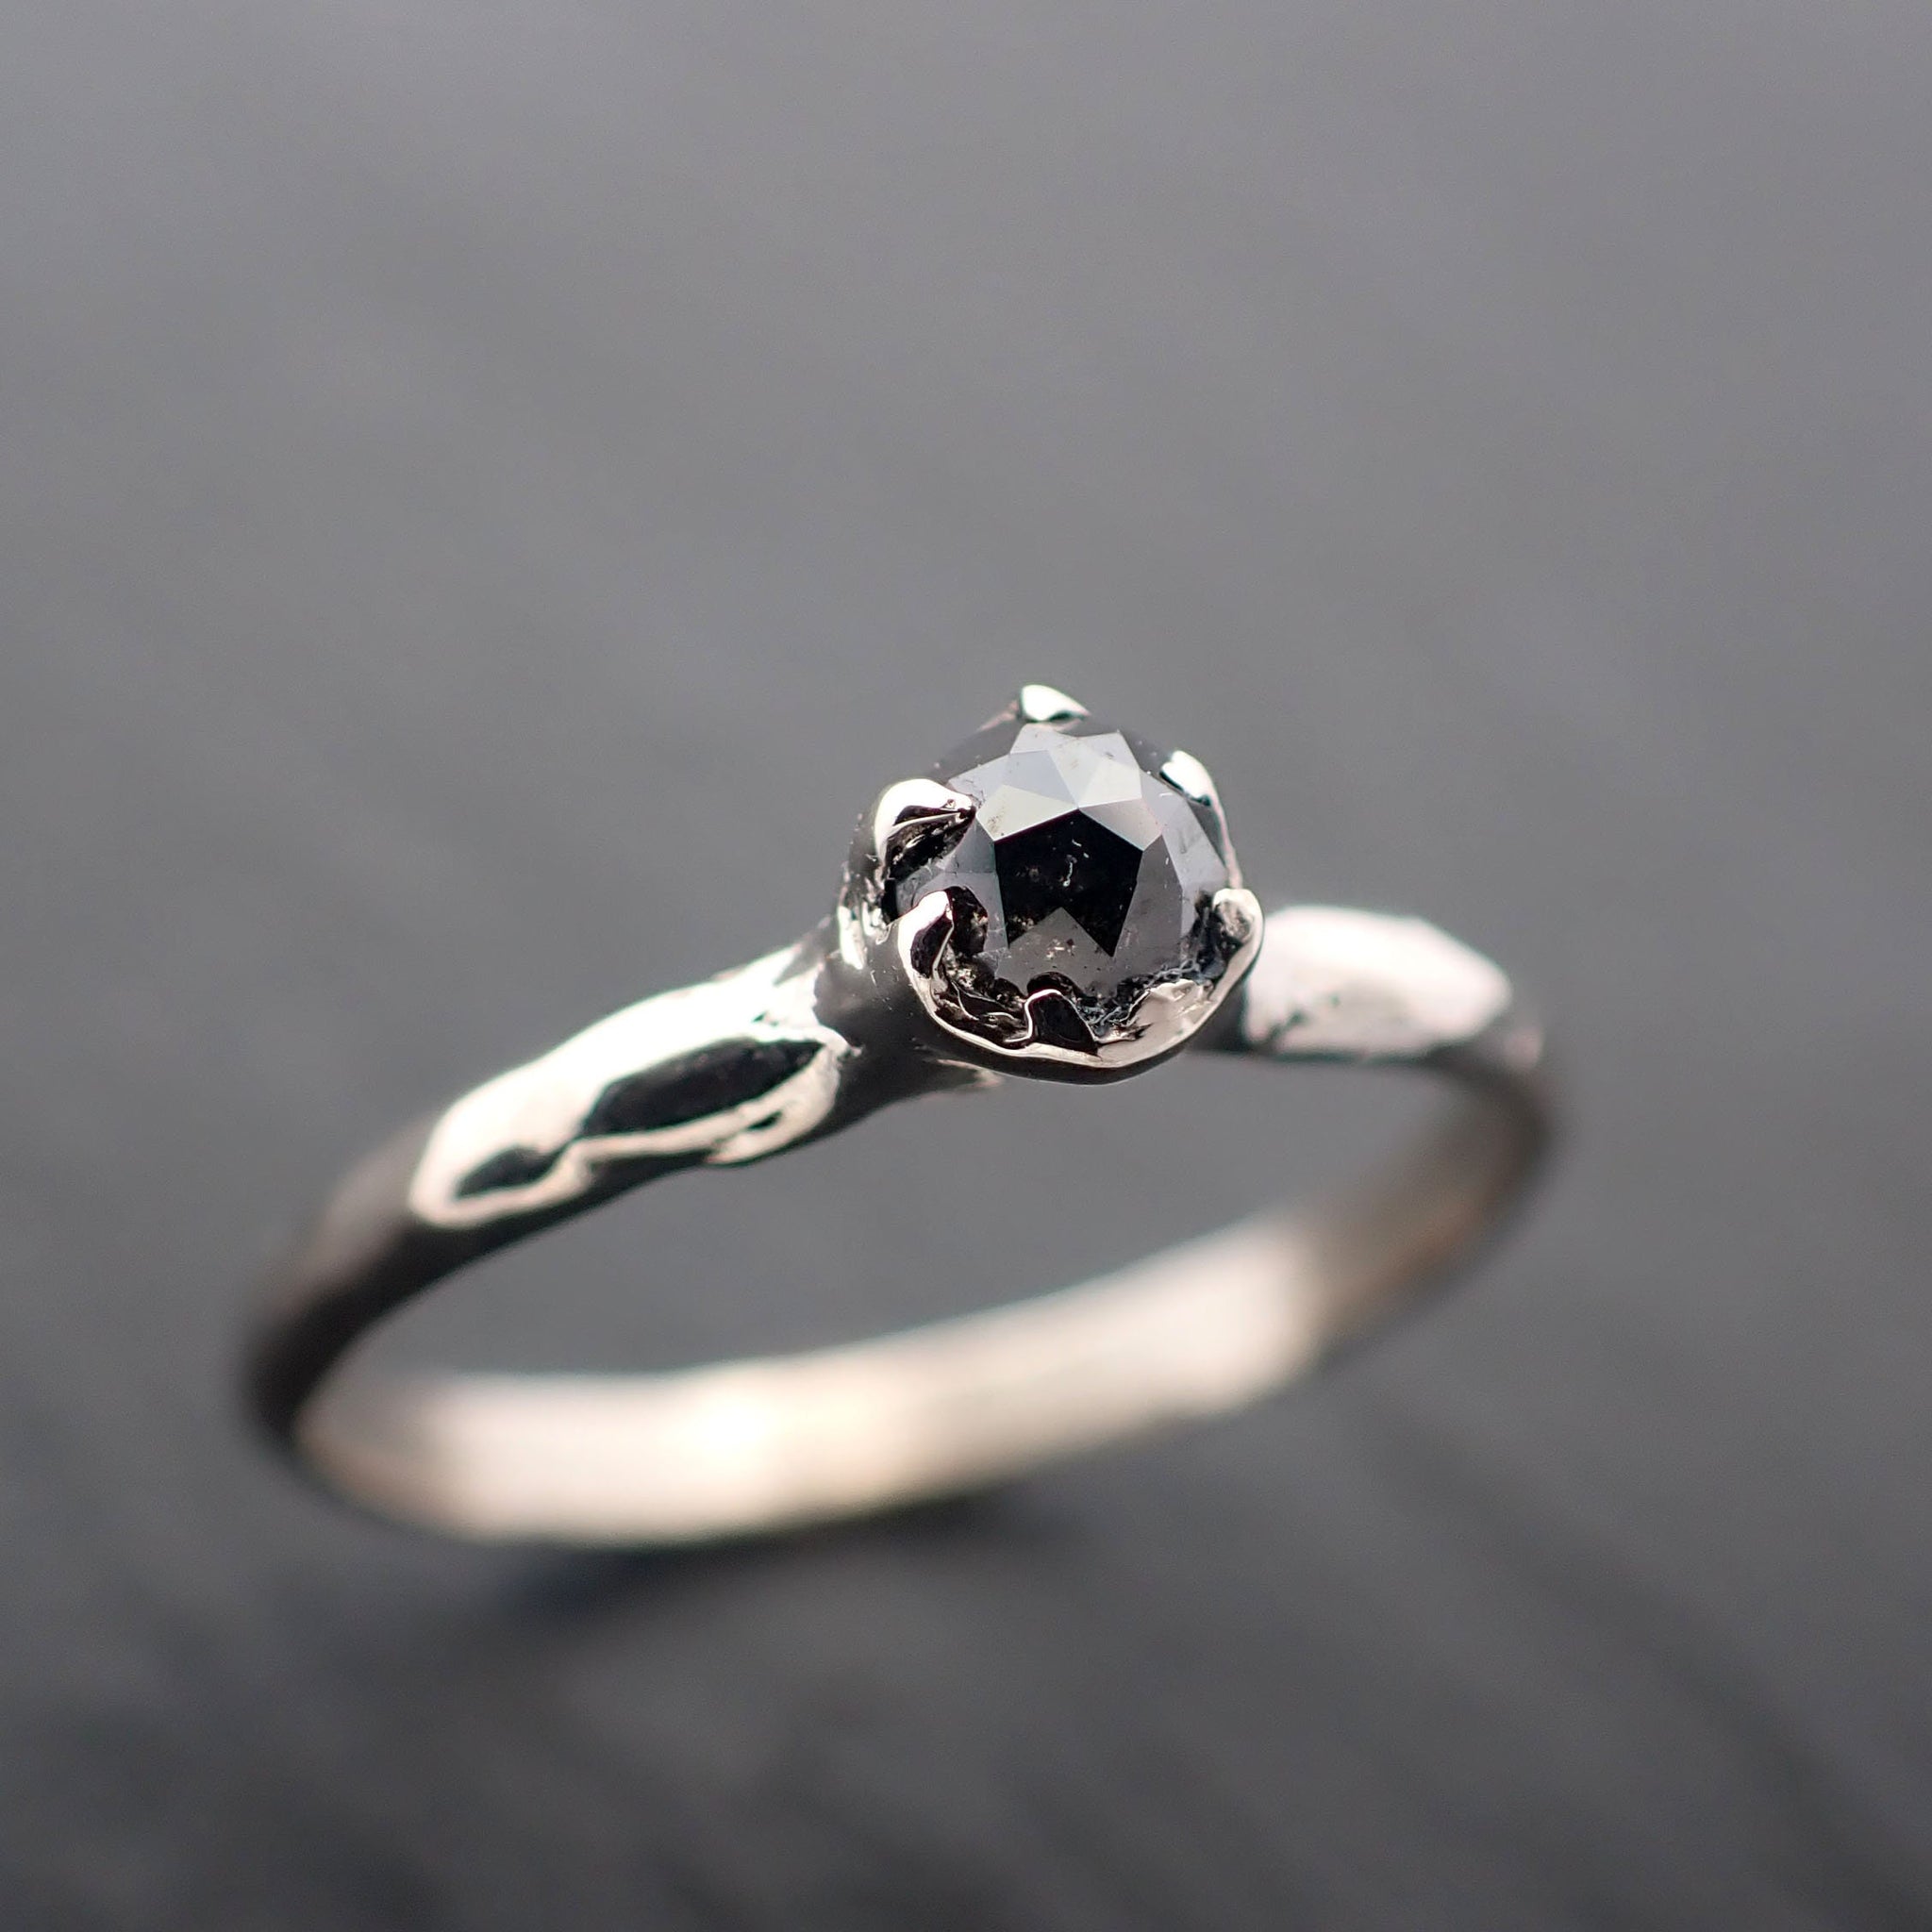 Faceted Fancy cut salt and pepper Diamond Solitaire Engagement 14k White Gold Wedding Ring byAngeline 3514